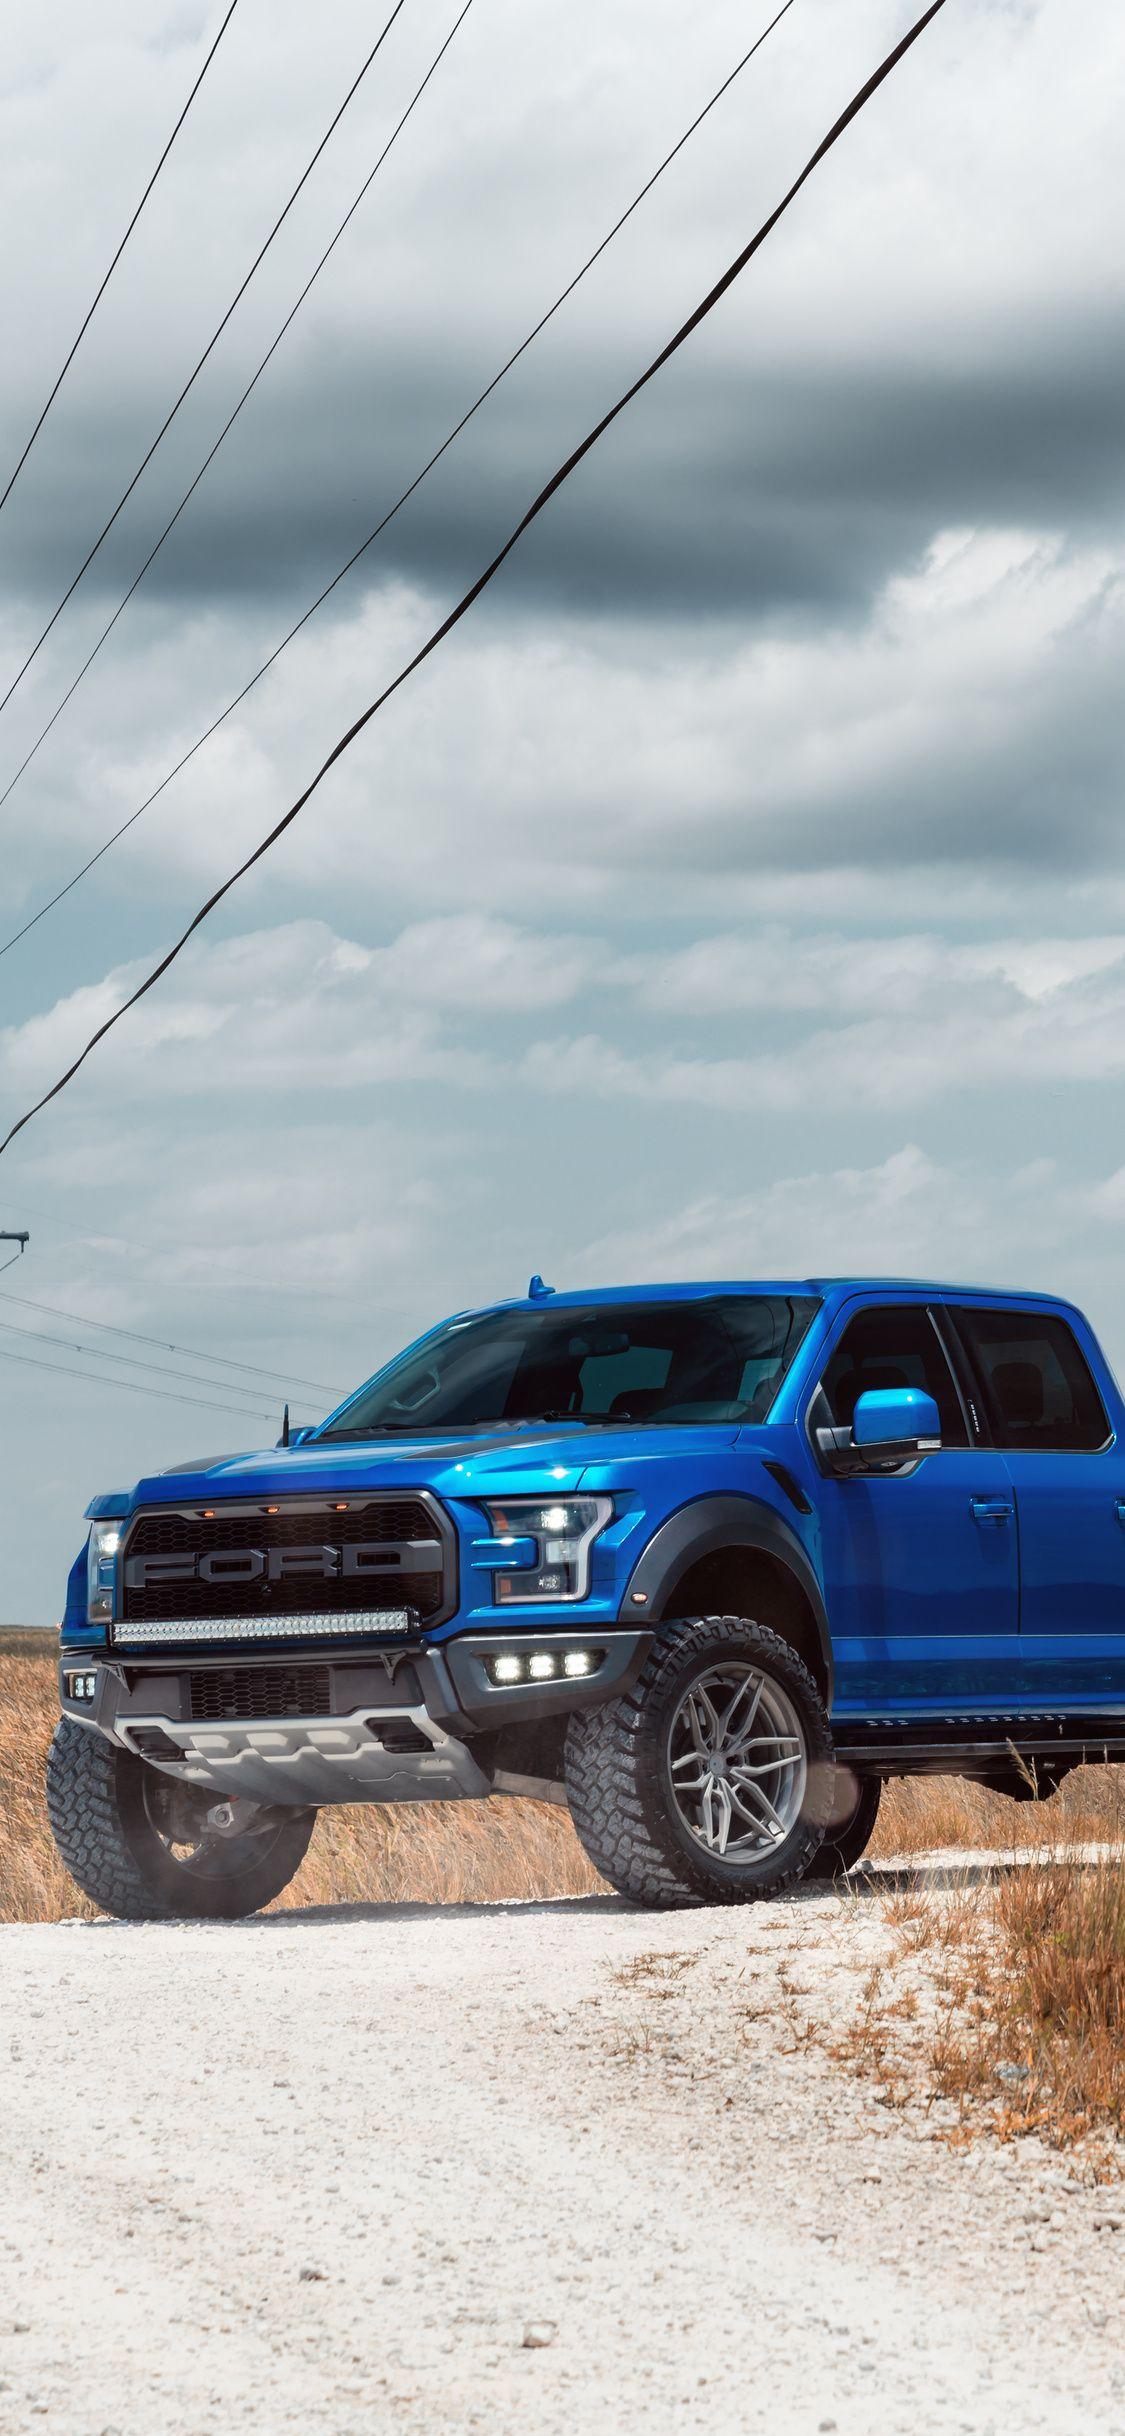 Ford Raptor 2019 wallpaper by zezooo90036  Download on ZEDGE  d2b1